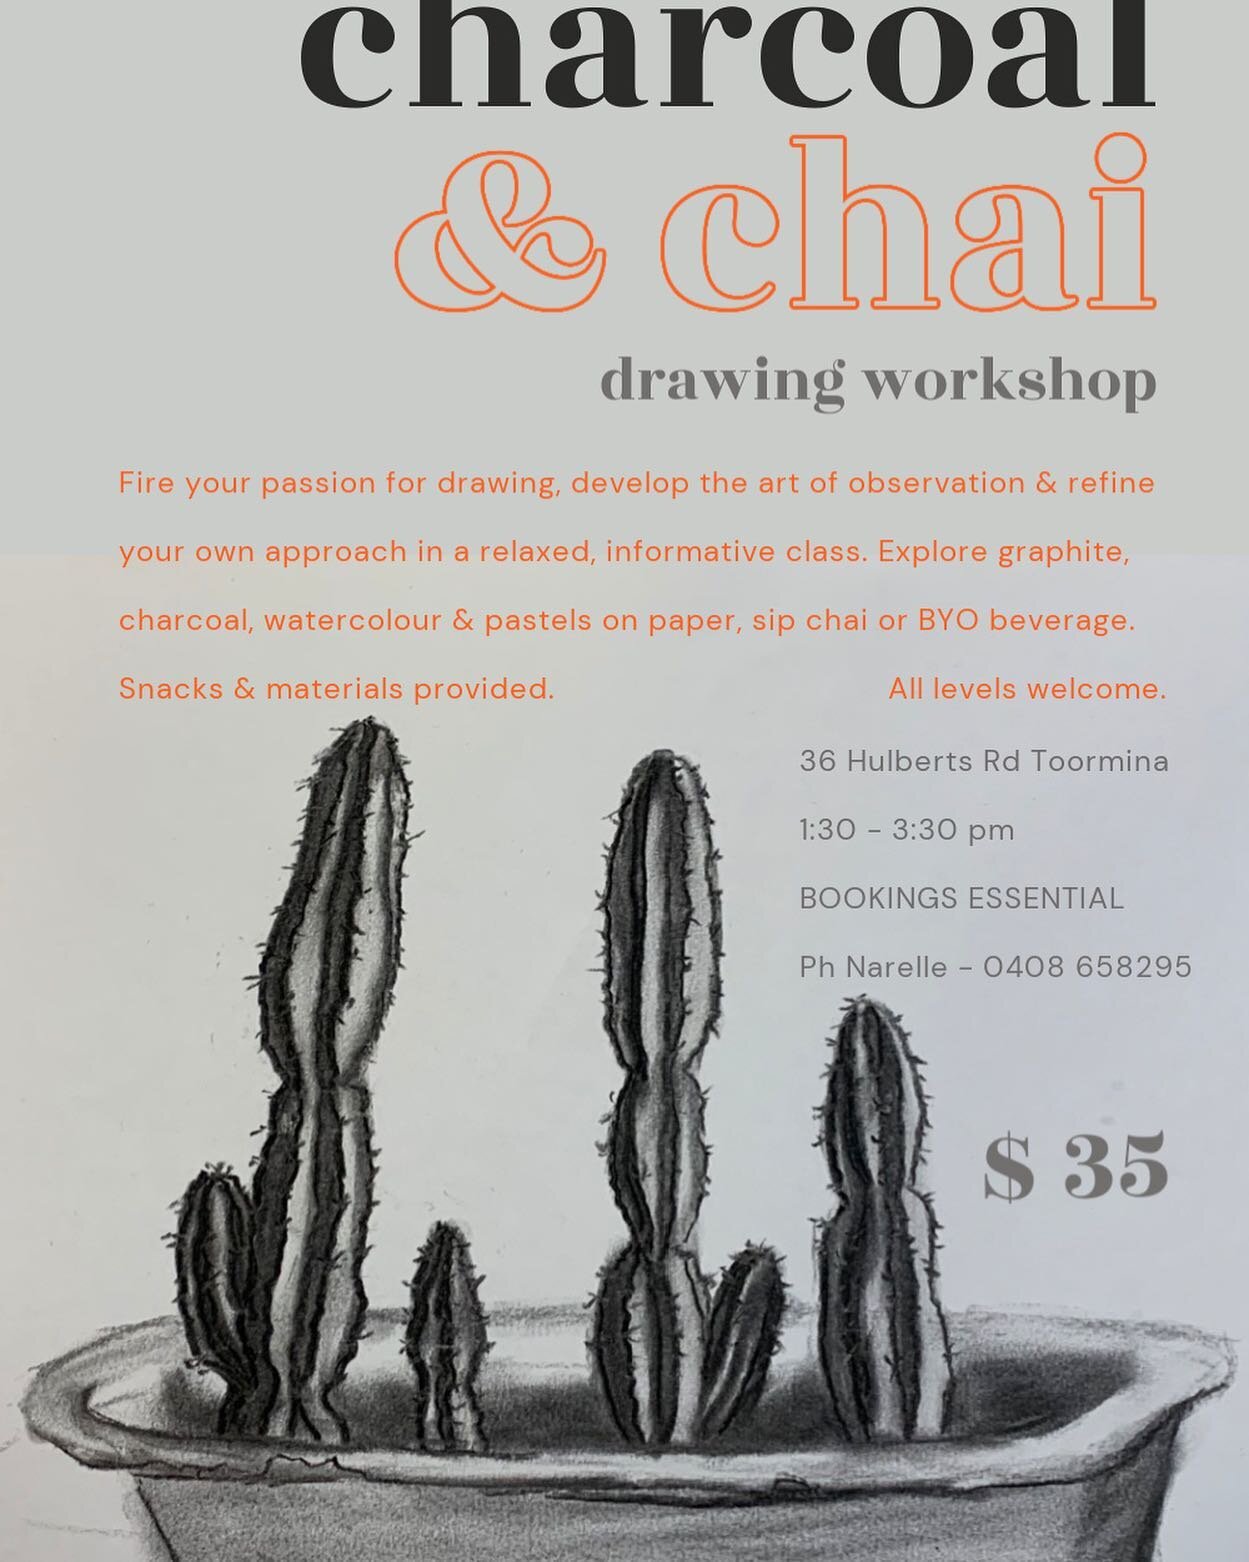 Once a month at the shed.
An afternoon of drawing.
27th August 1:30 - 3:30pm

Each month we will explore a different focus, there will be chai, snacks &amp; materials provided, no experience necessary.
DM or link in bio to book